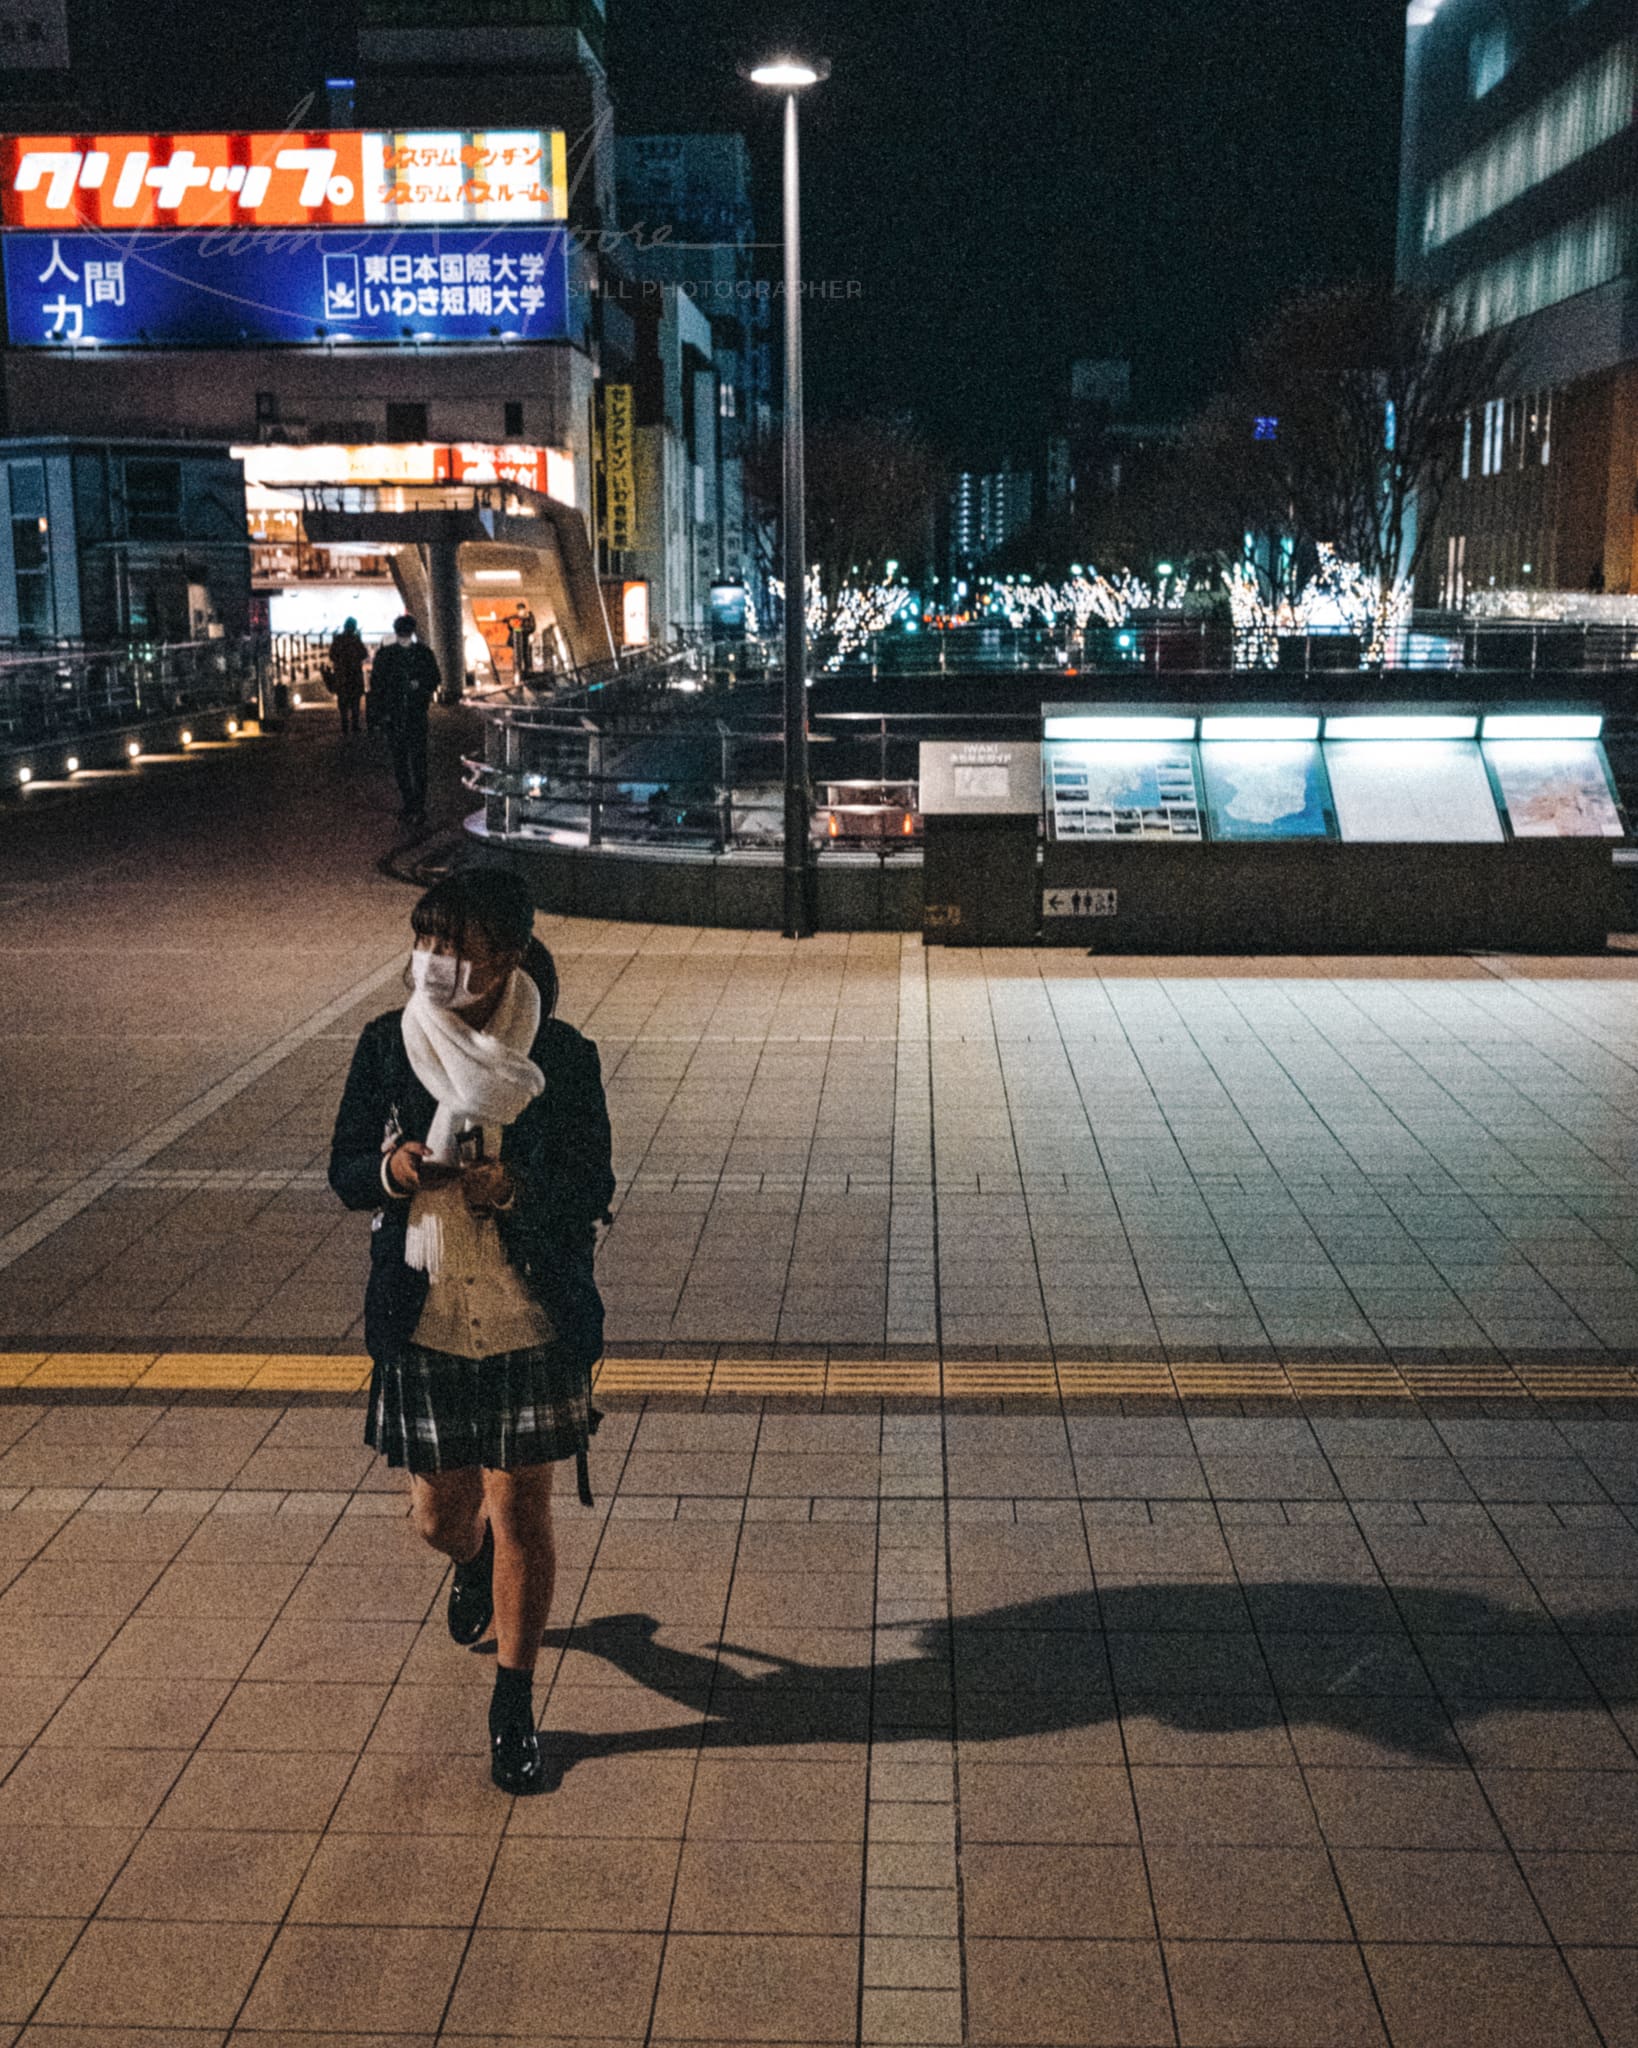 Masked Japanese school girl using smartphone in vibrant, illuminated commercial district in Japan at night.